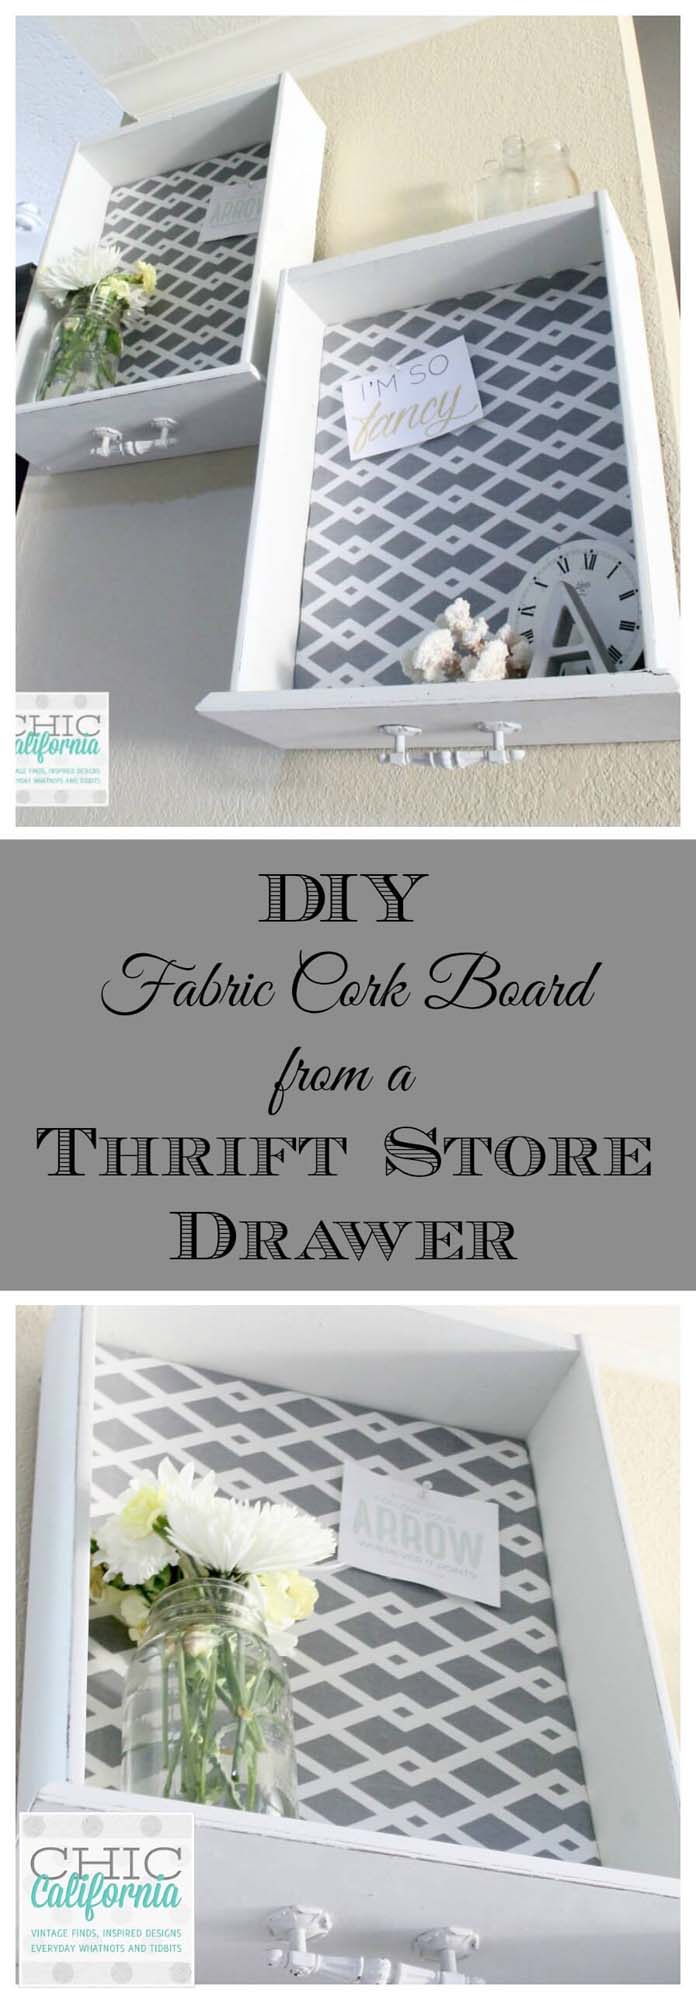 Recycled Old Drawer Ideas for the Bathroom #recycle #olddrawer #decorhomeideas